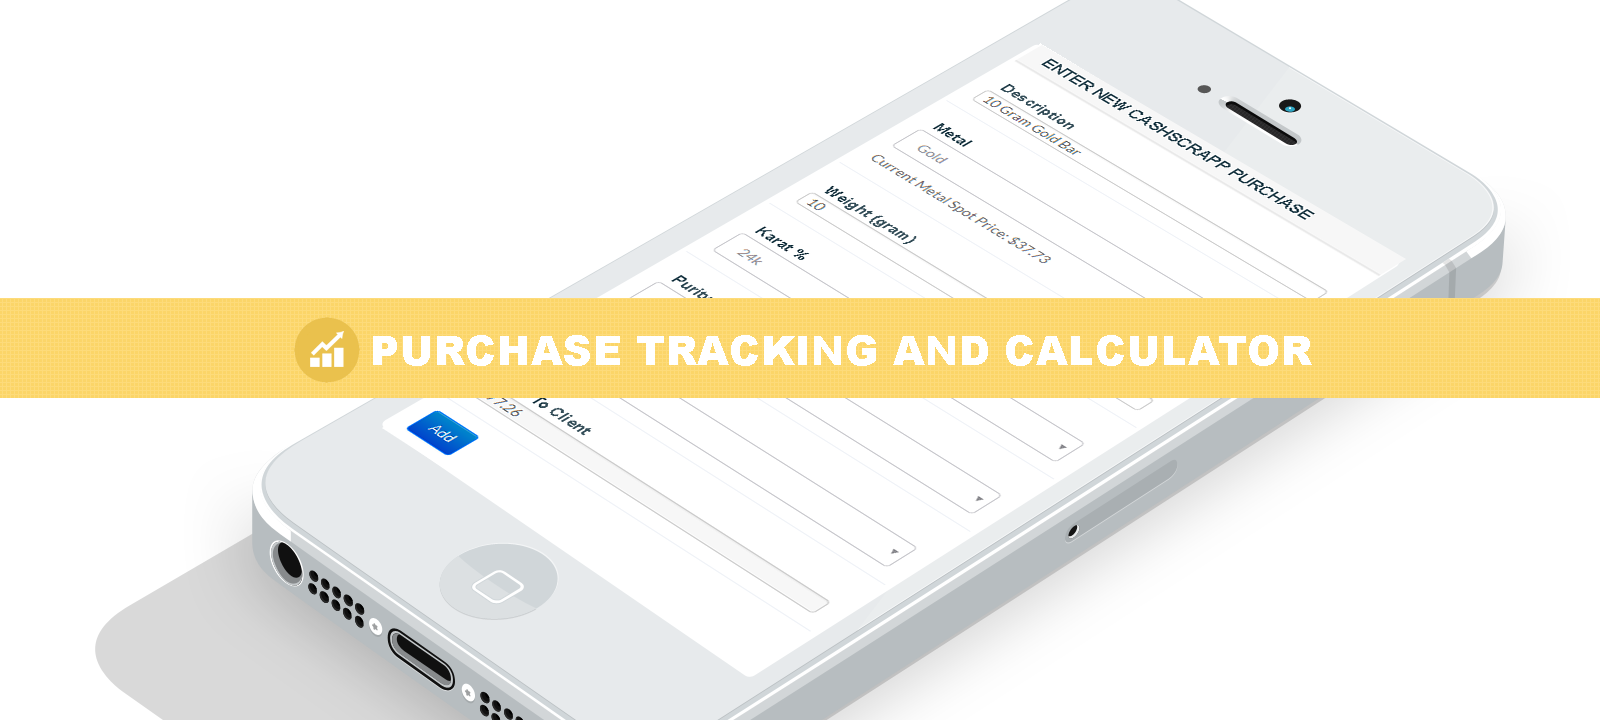 Cash for gold purchase tracking application and calculator.